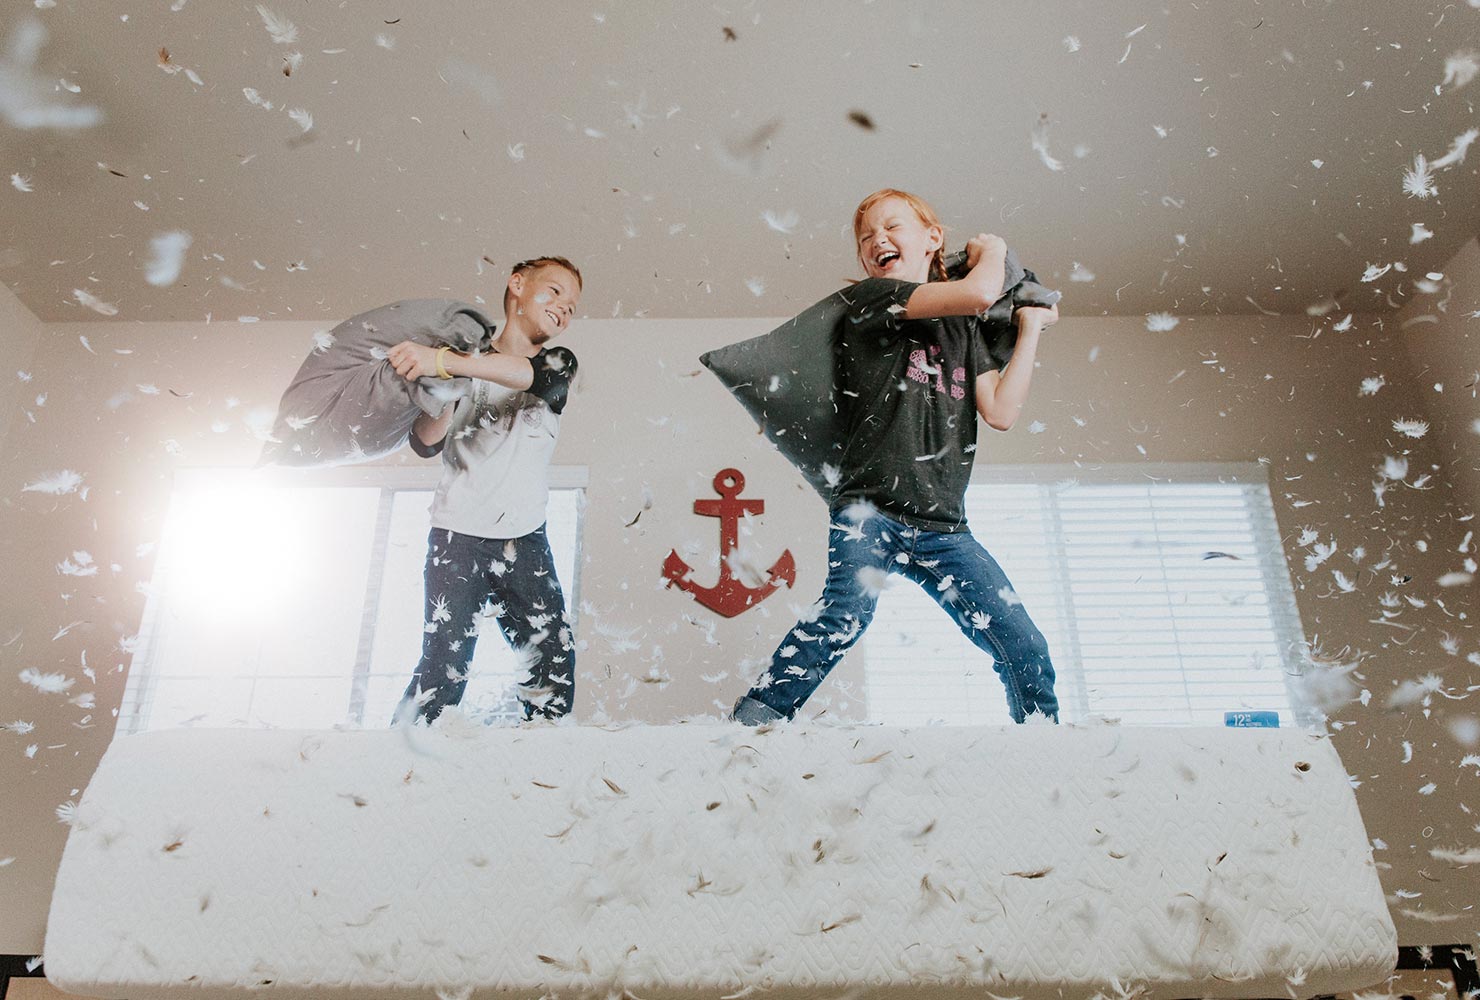 brothers pillow fight